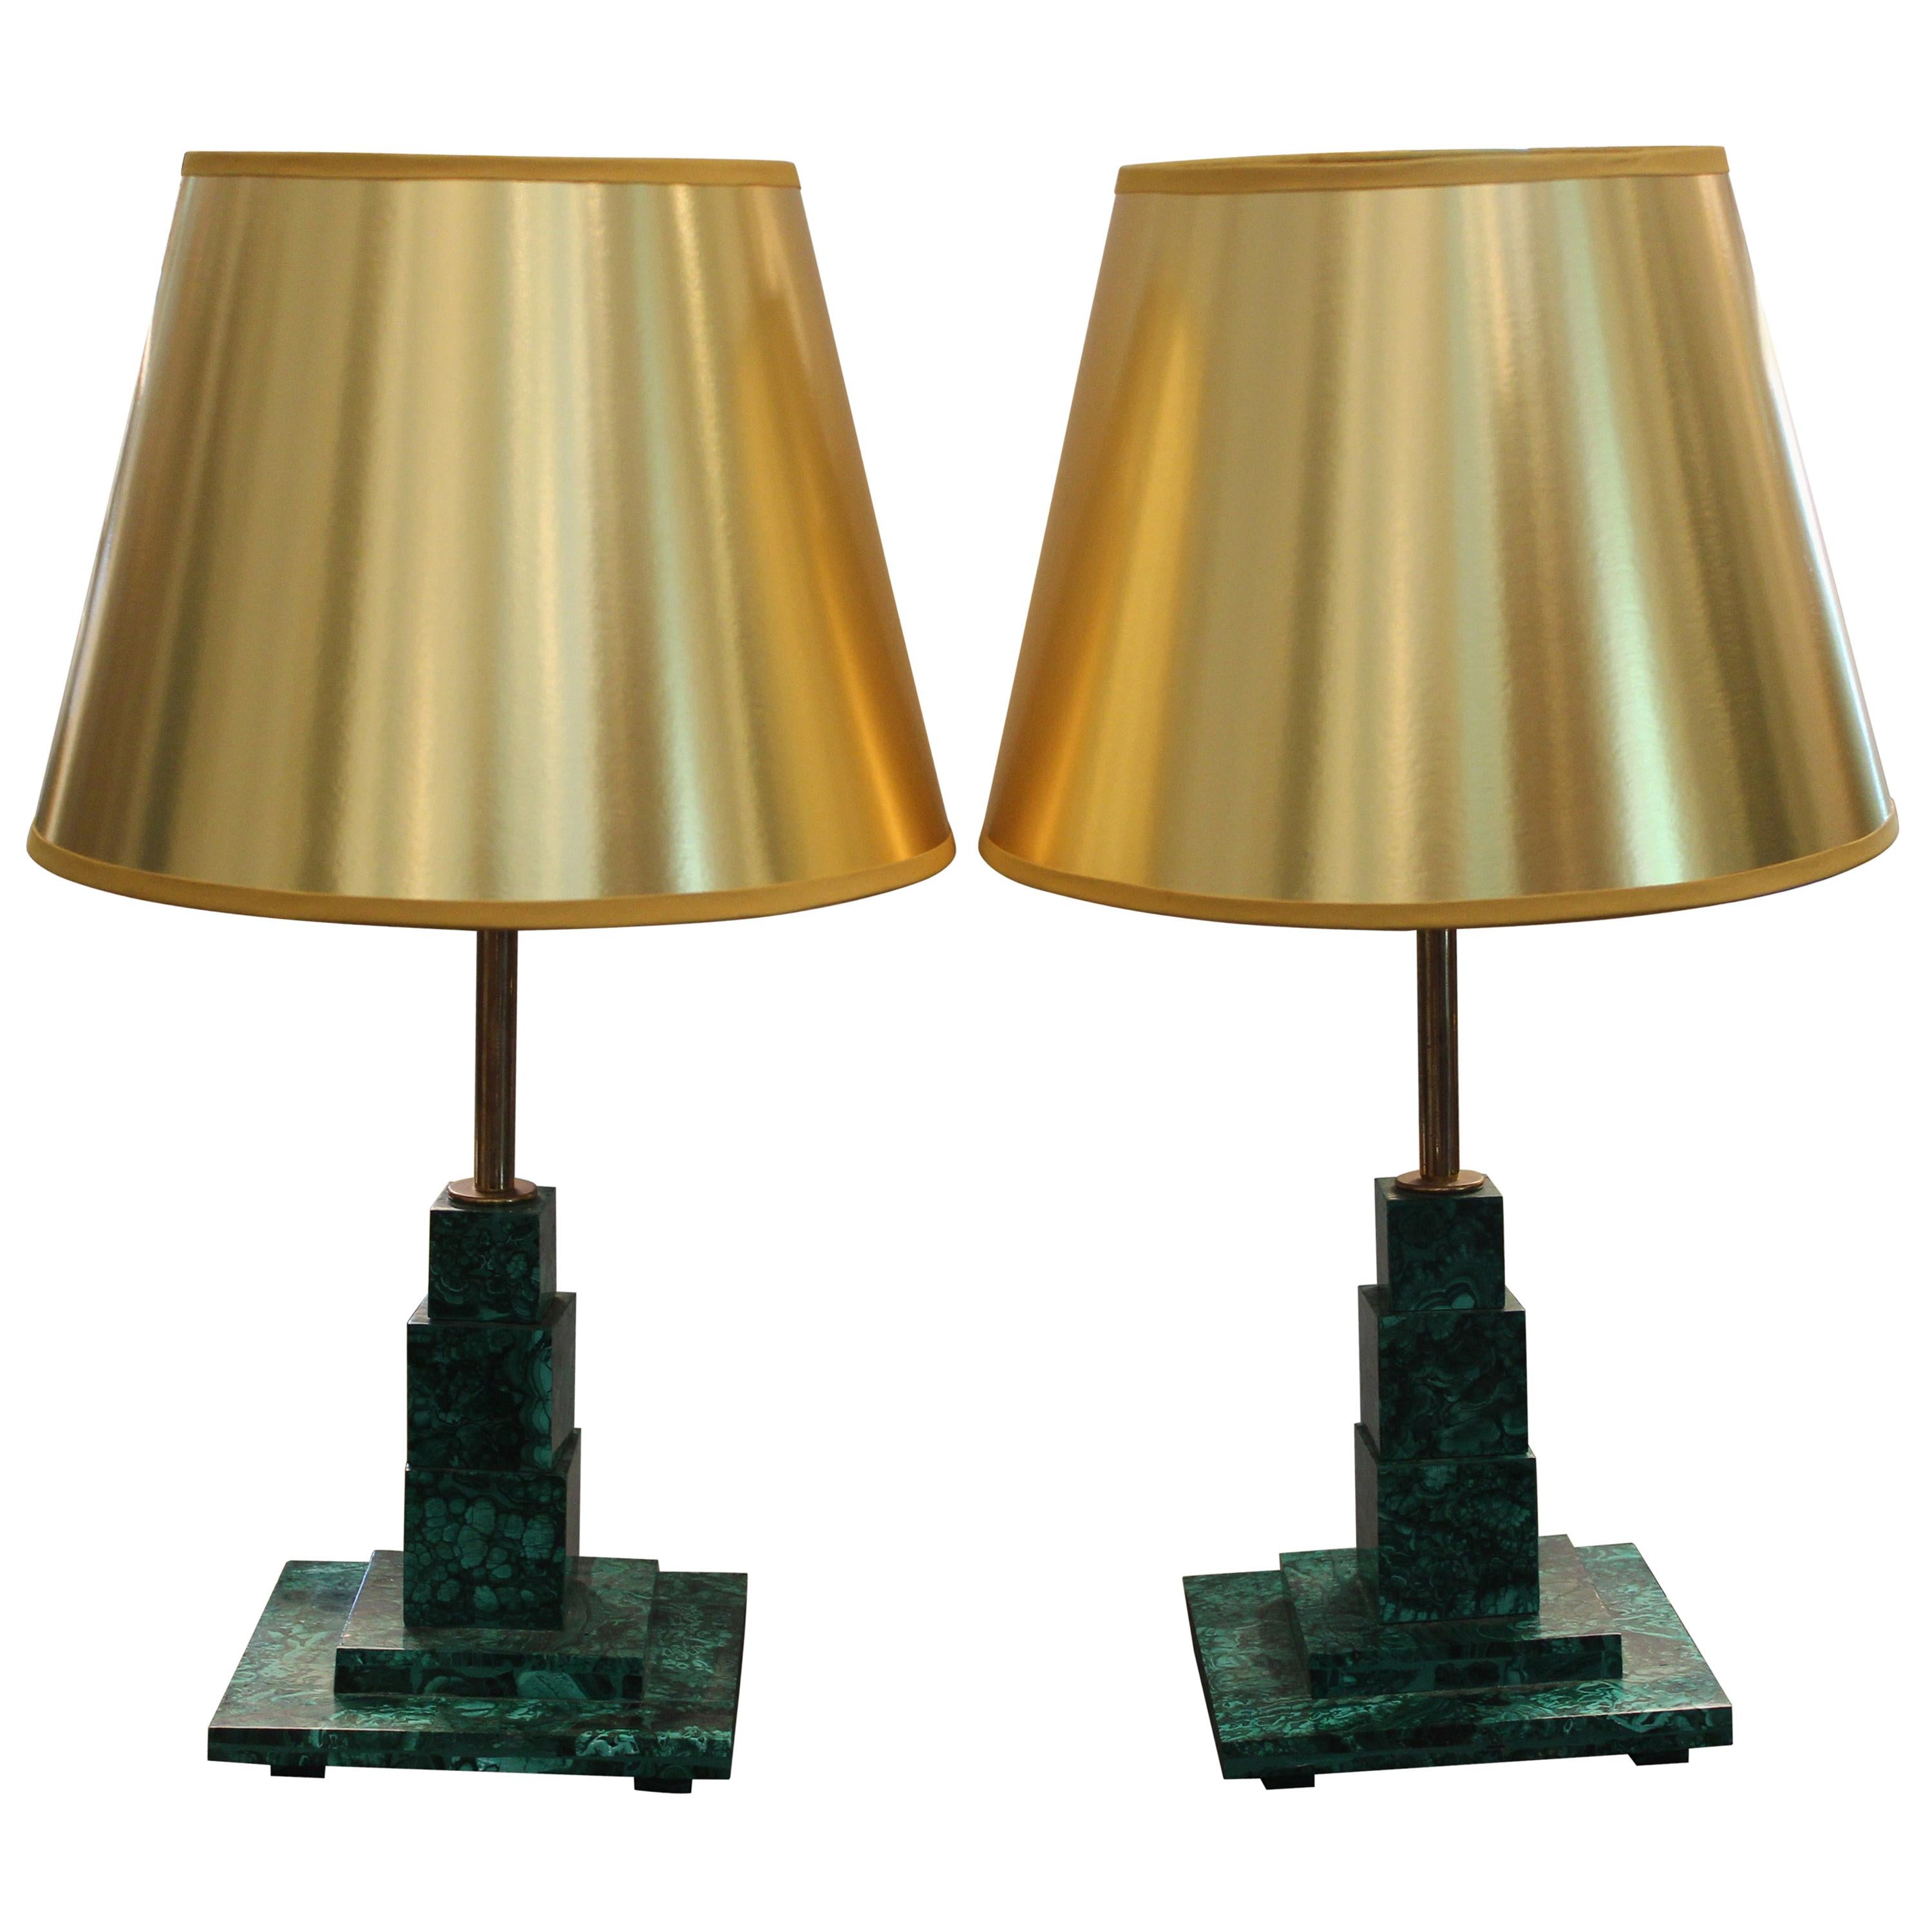 Pair of Square Malachite Table Lamps with Gold Shades